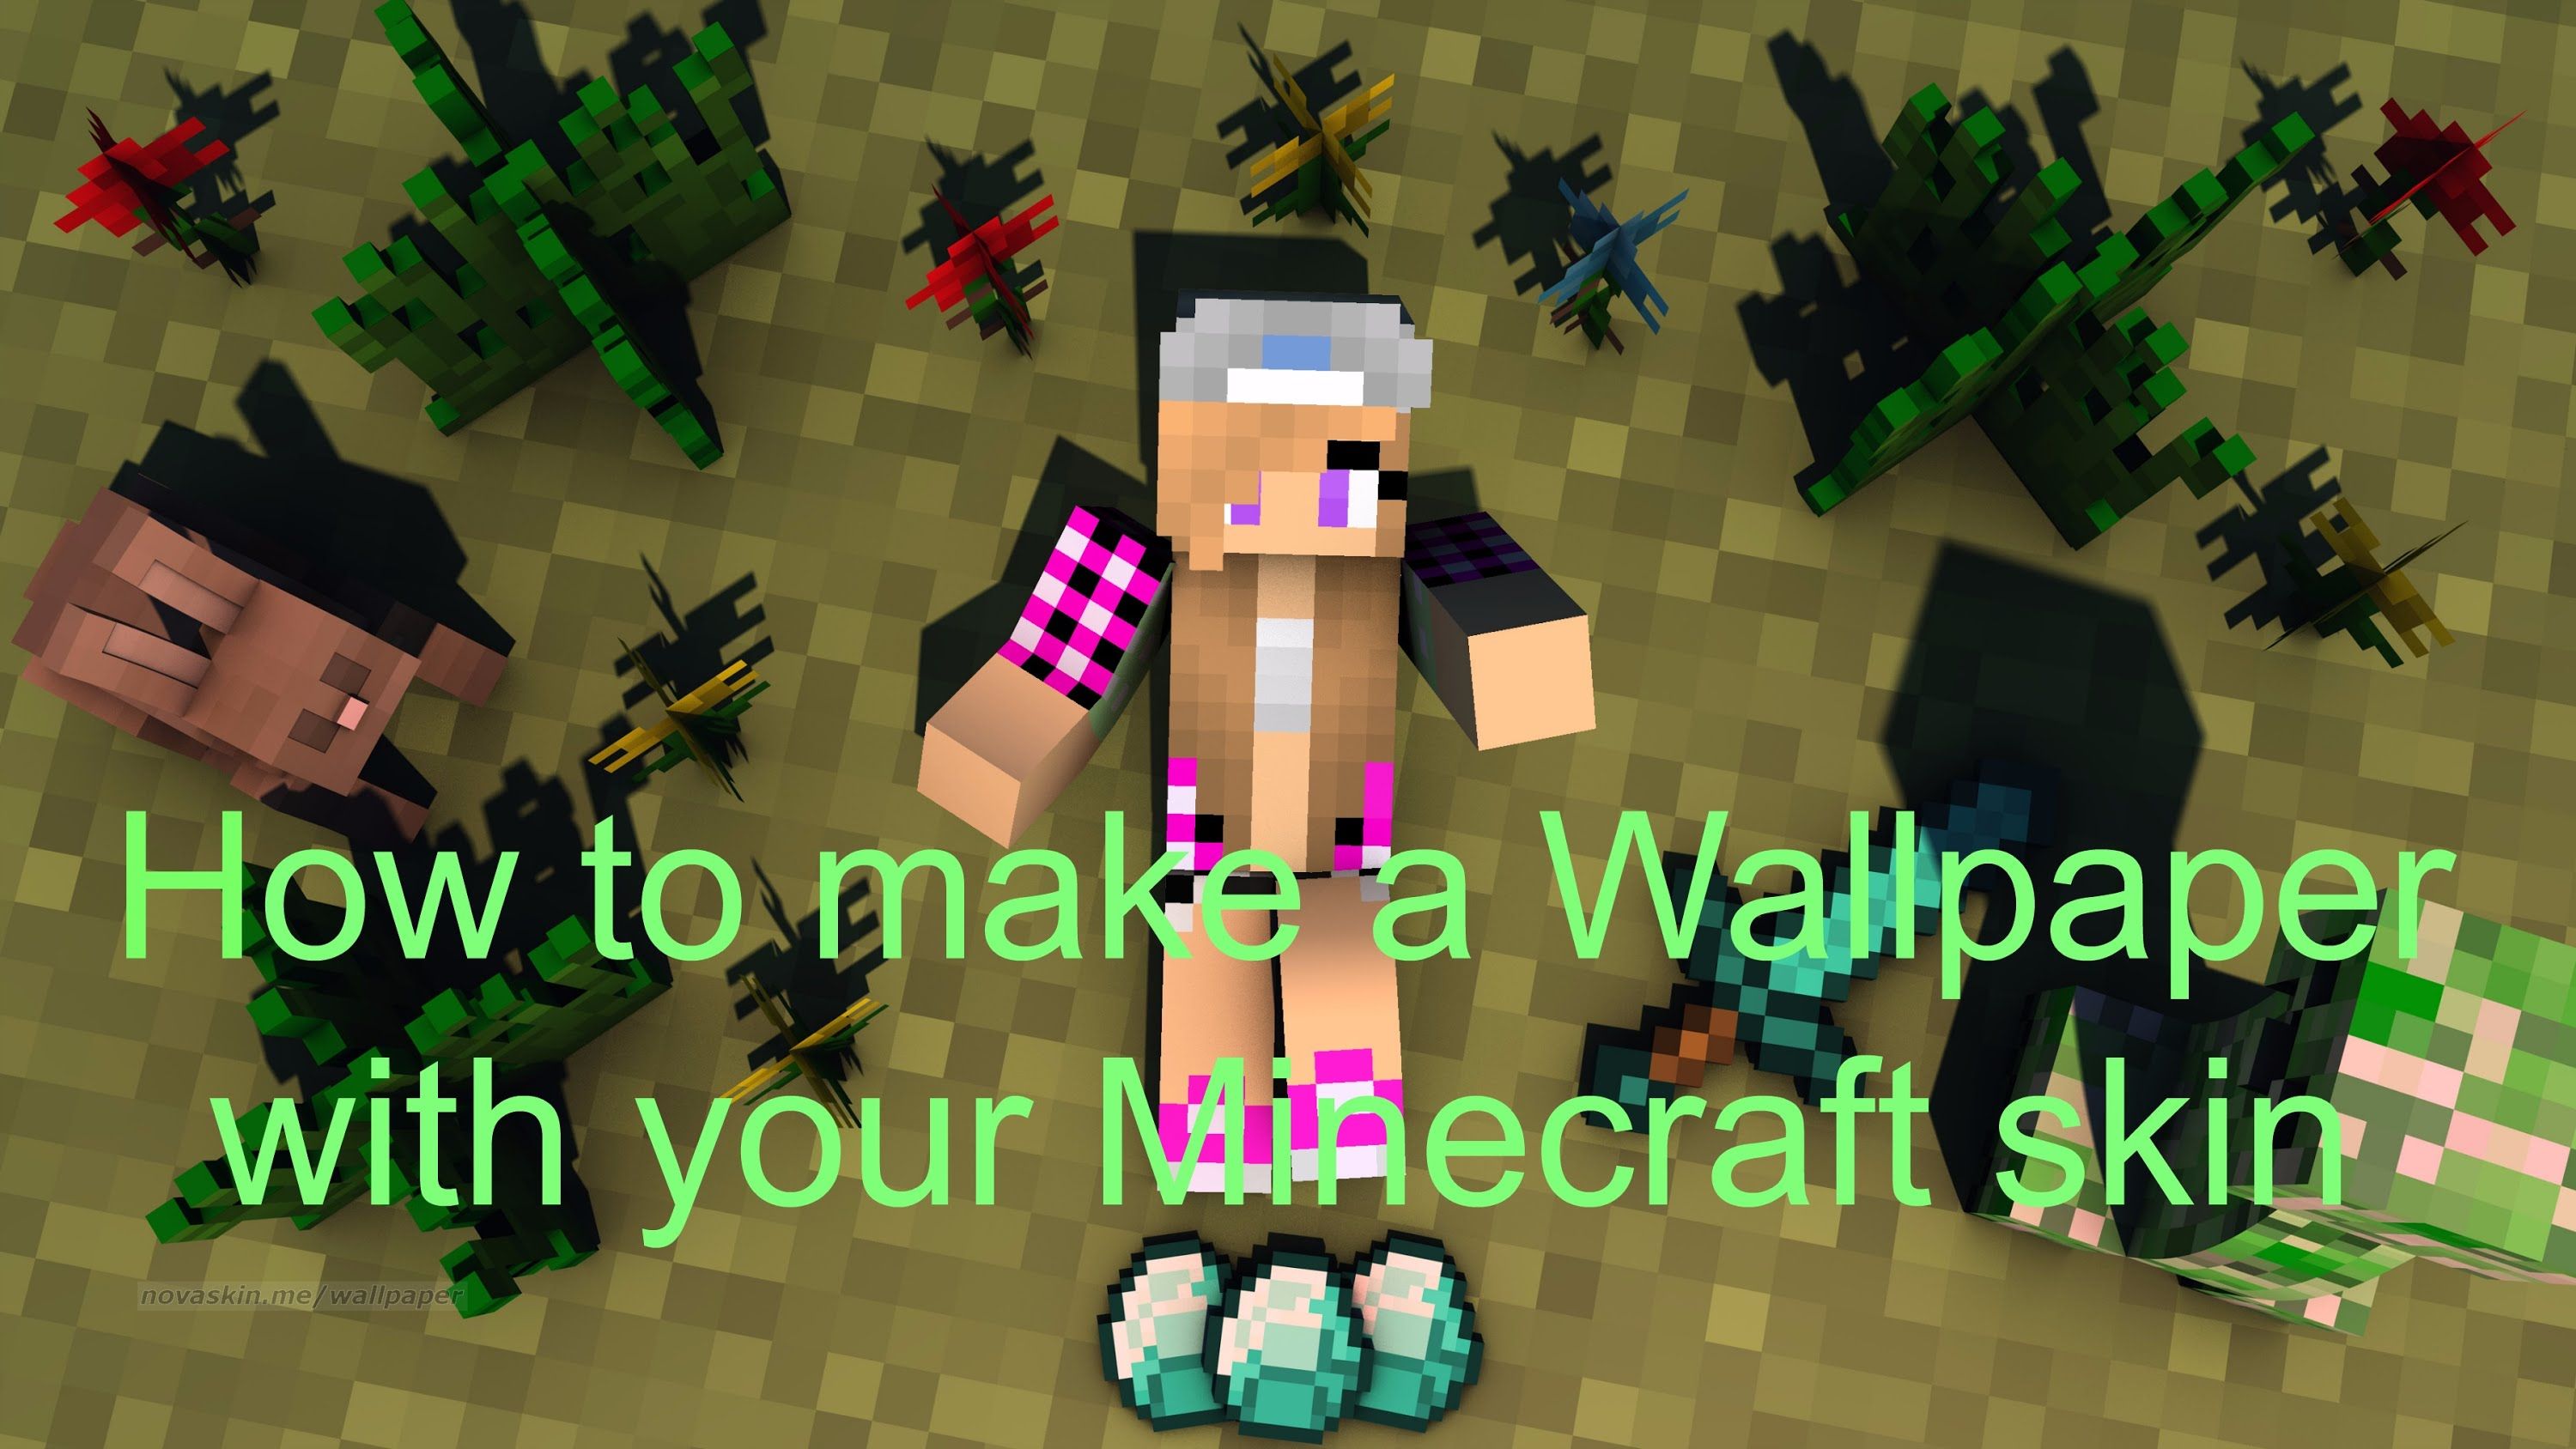 How To Make A Wallpaper With Your Minecraft Skin - Minecraft Skin Wallpaper  3d - 3000x1688 Wallpaper 